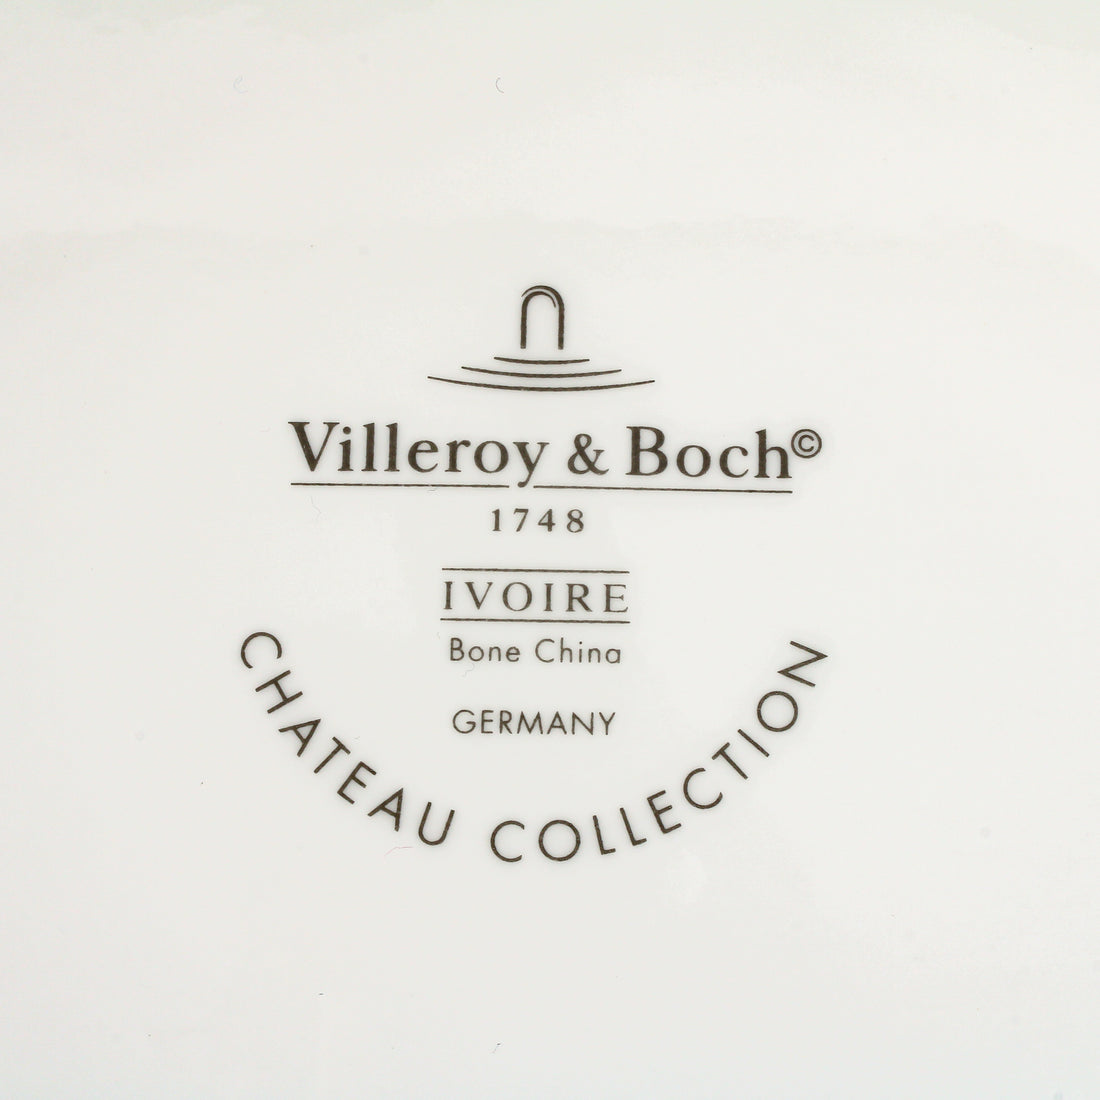 VILLEROY & BOCH Ivoire Chateau Collection Chargers - Set of 7